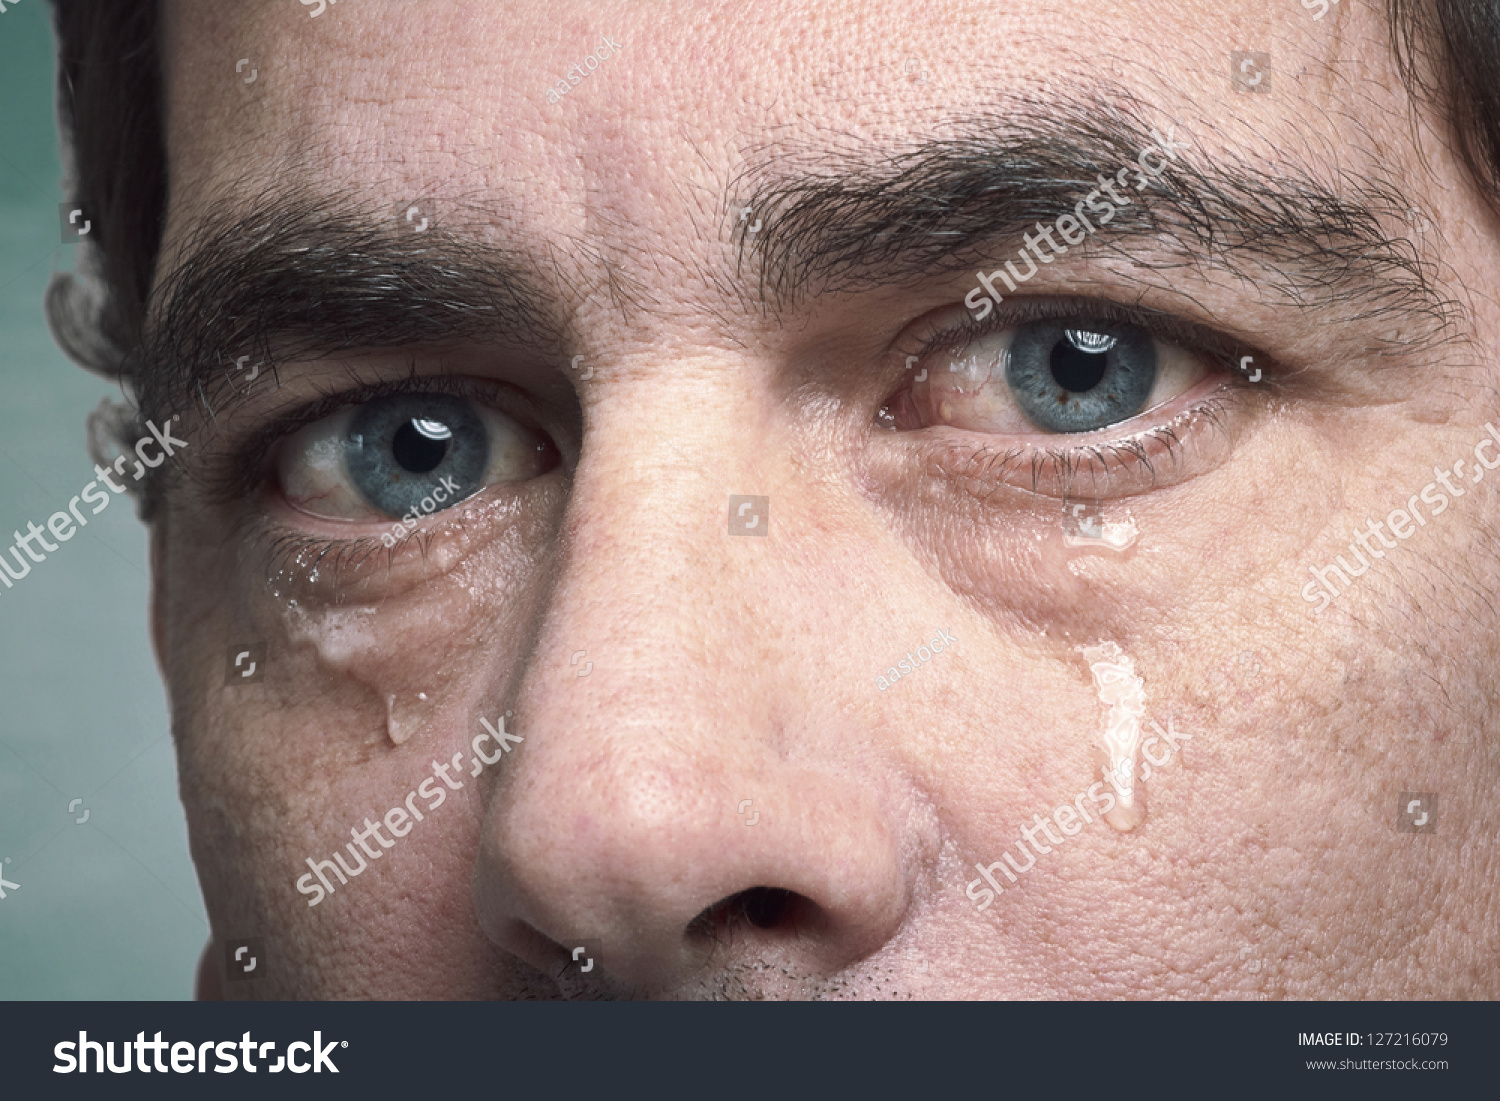 stock-photo-tears-in-eyes-of-crying-adul